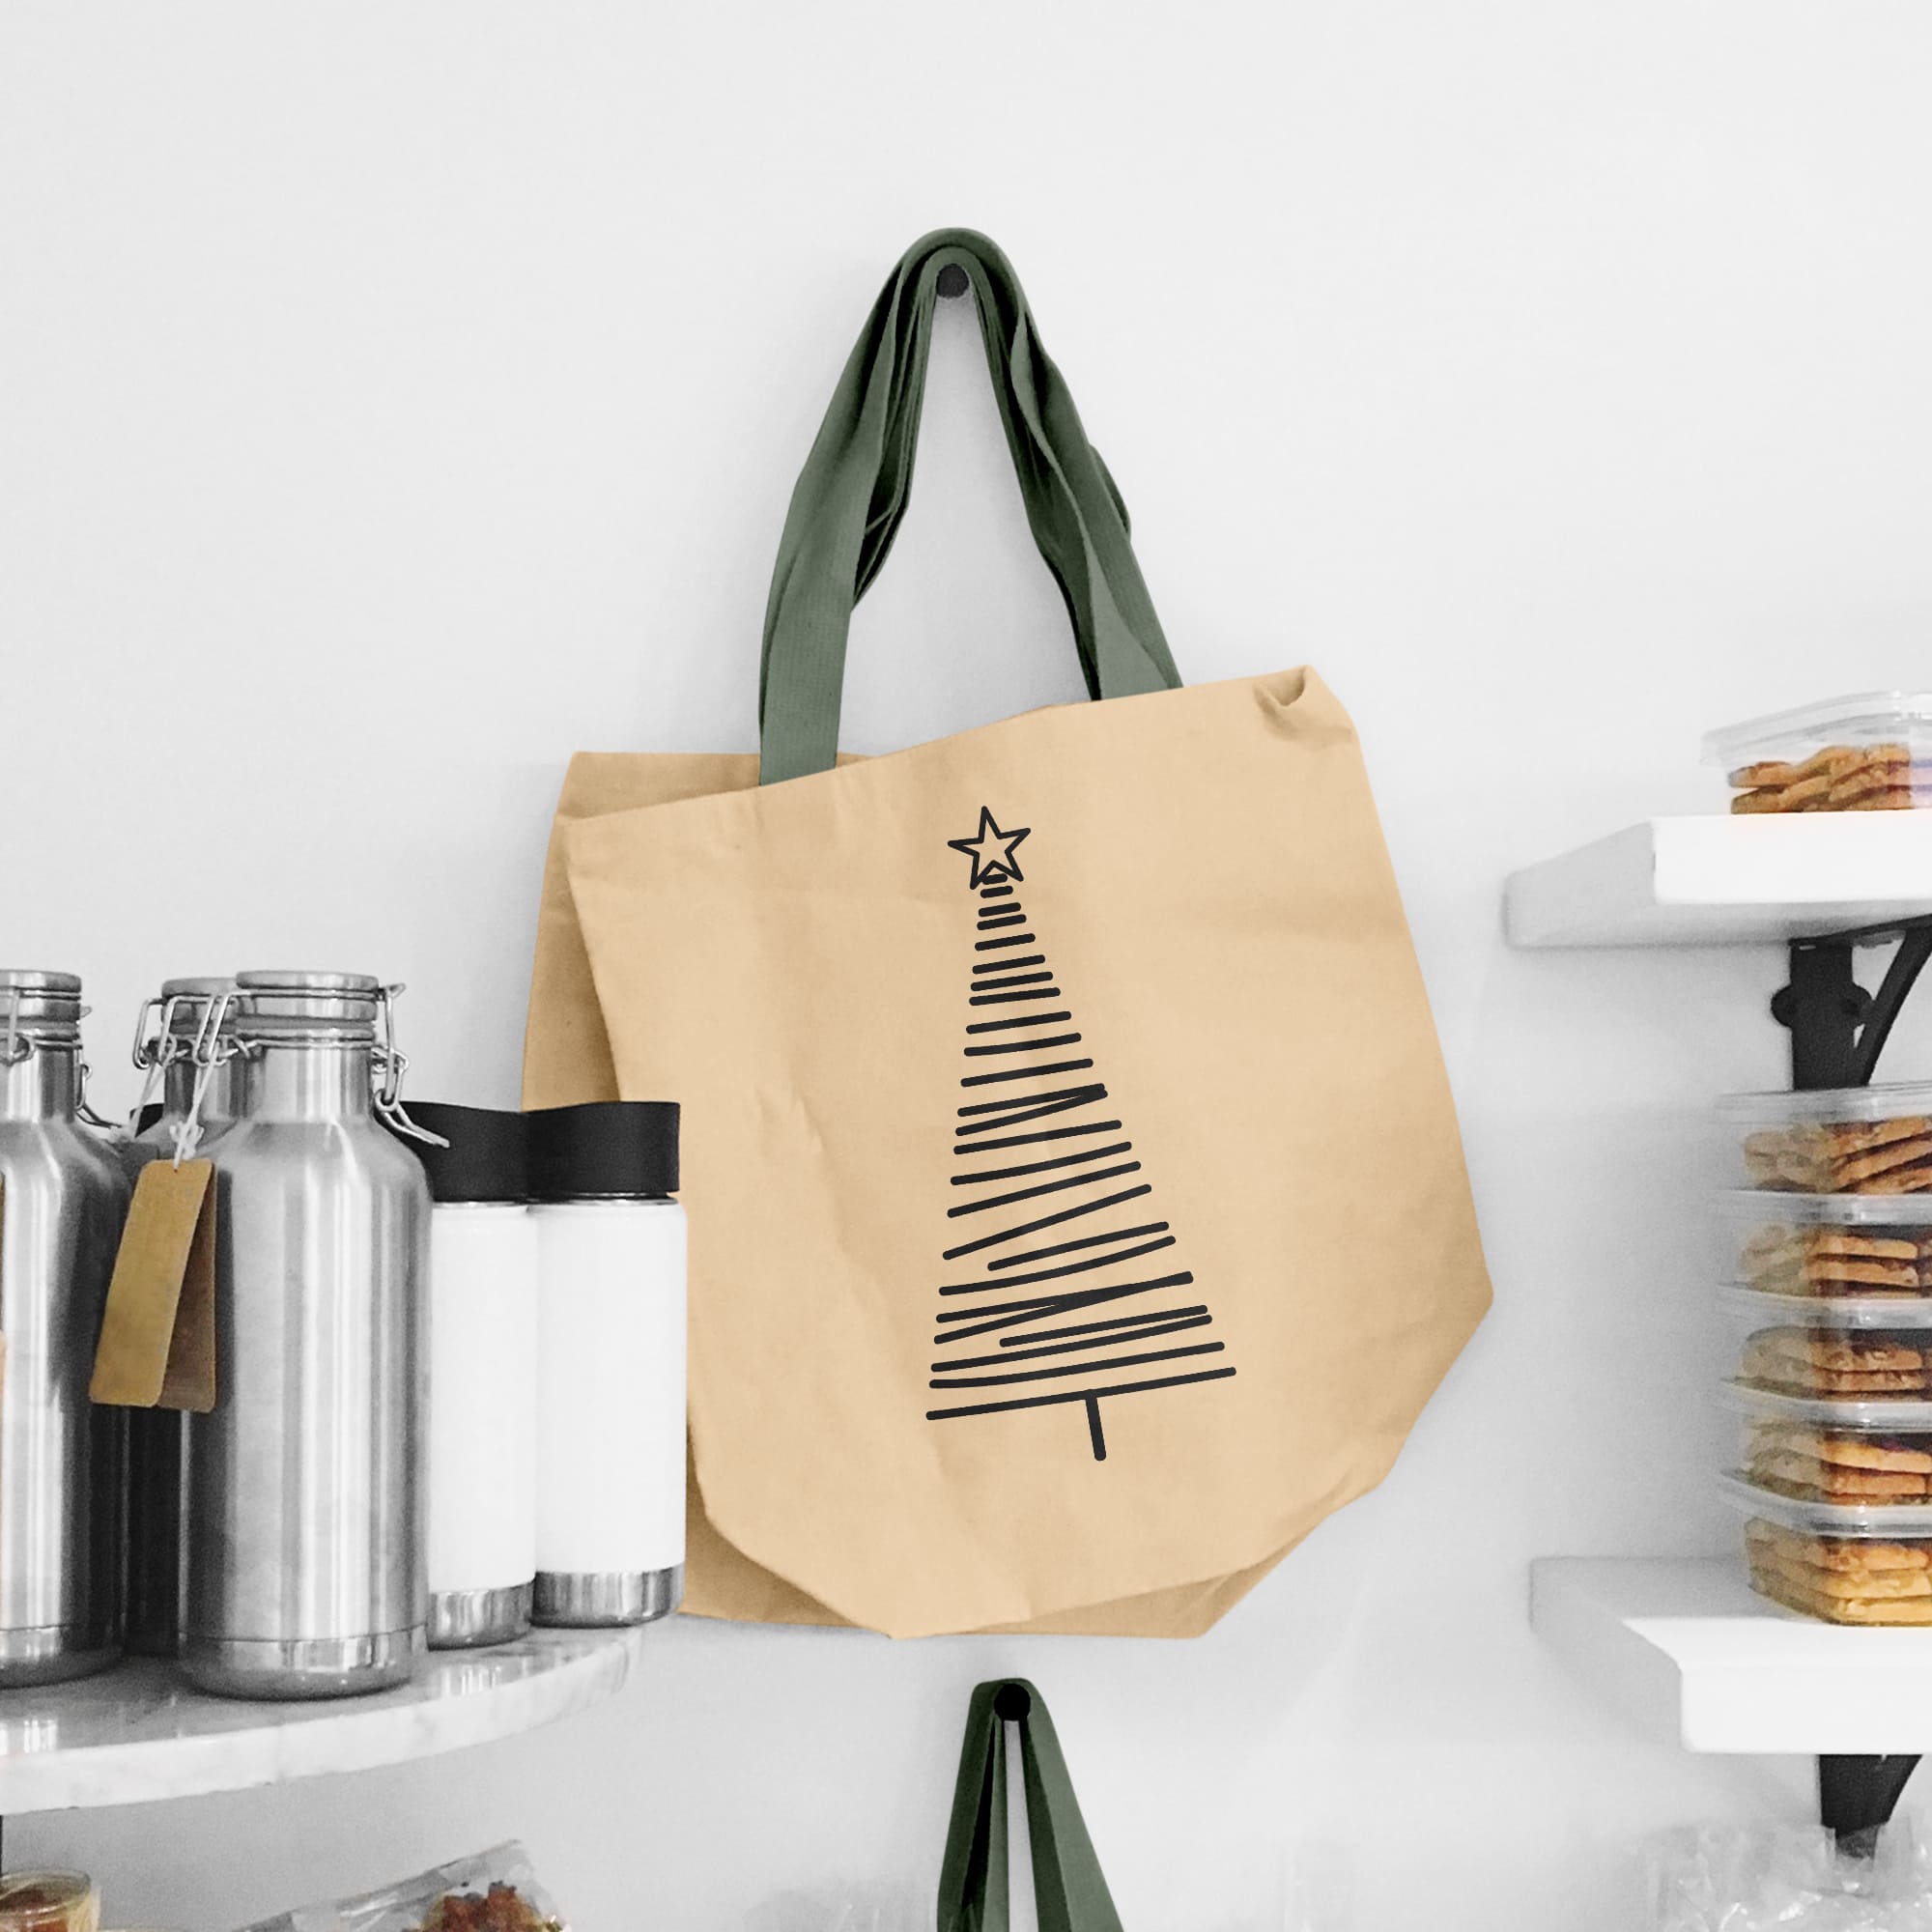 Cute shopping bag with Christmas tree.